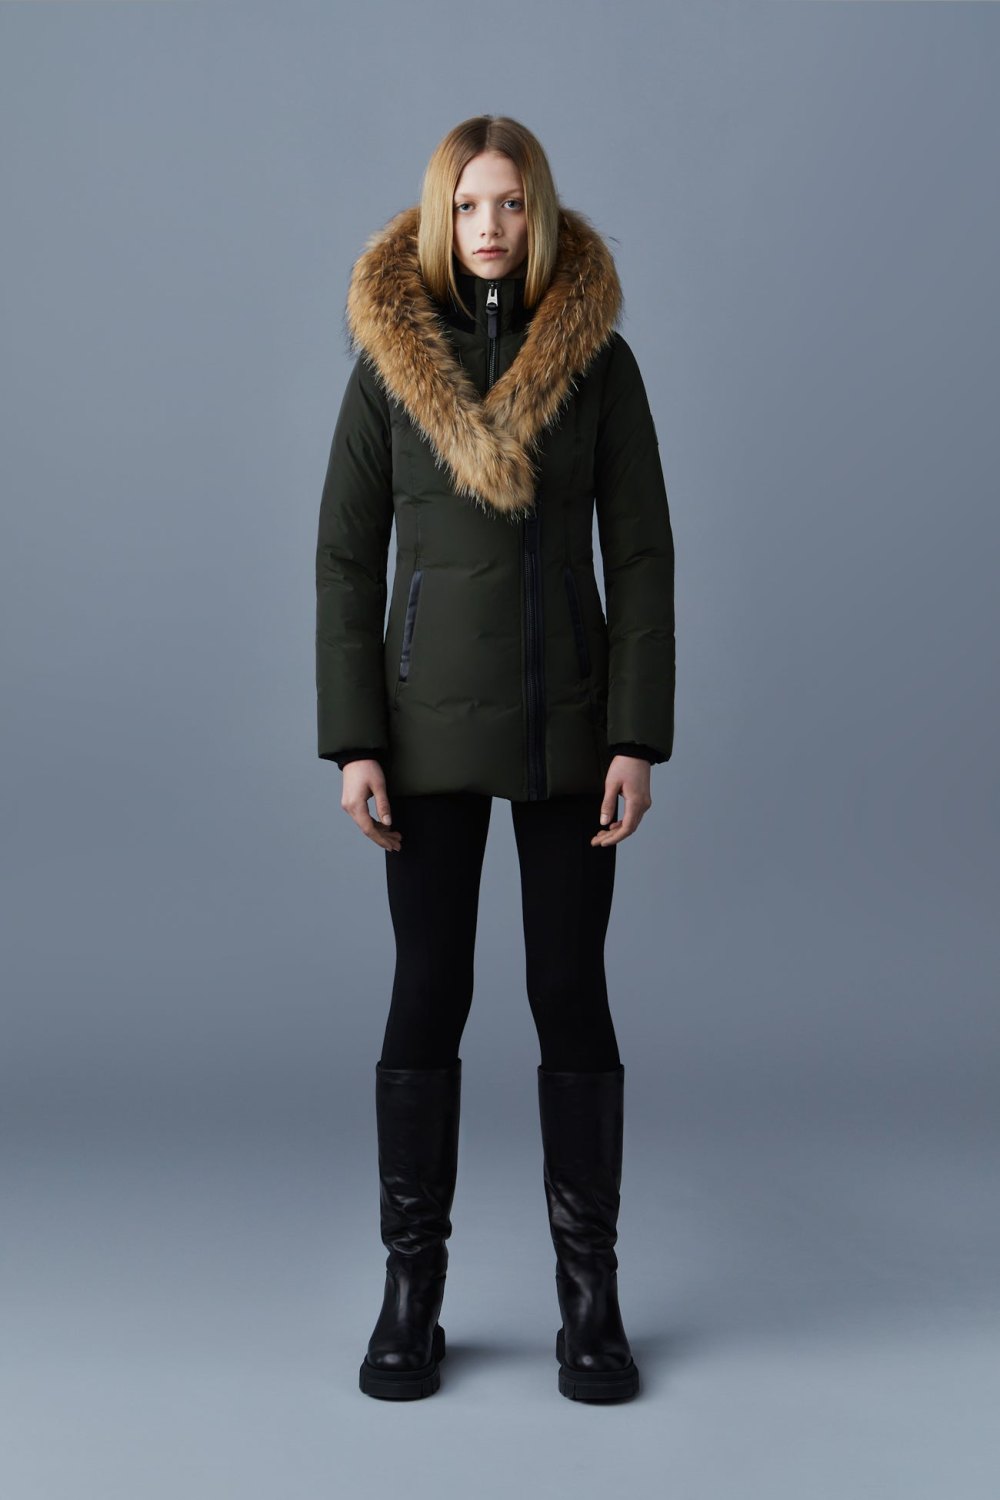 Mackage Adali down jacket with characteristic Mackage collar made of natural fur